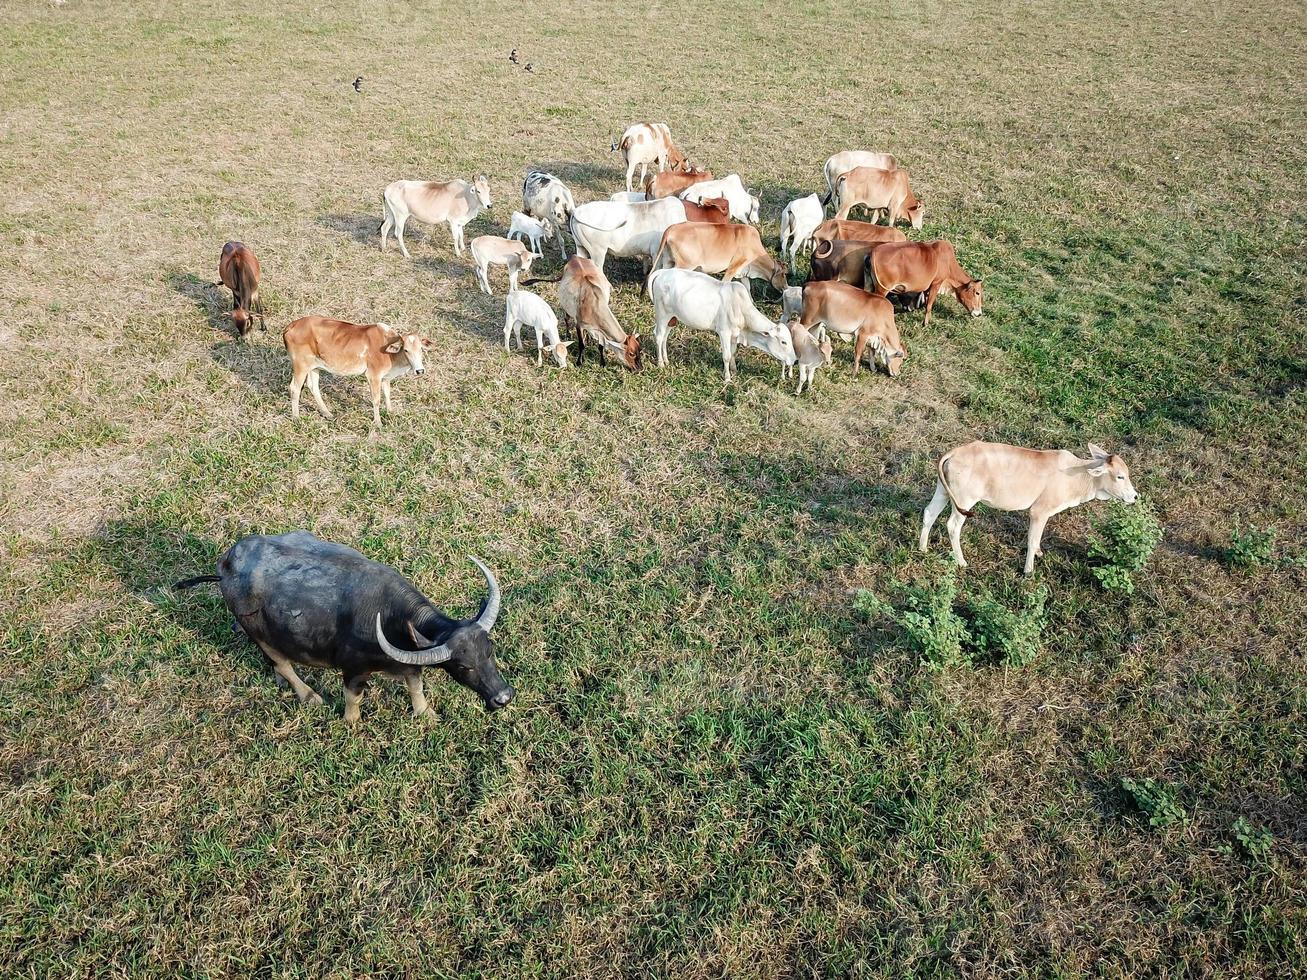 A buffalo in the group of cows photo